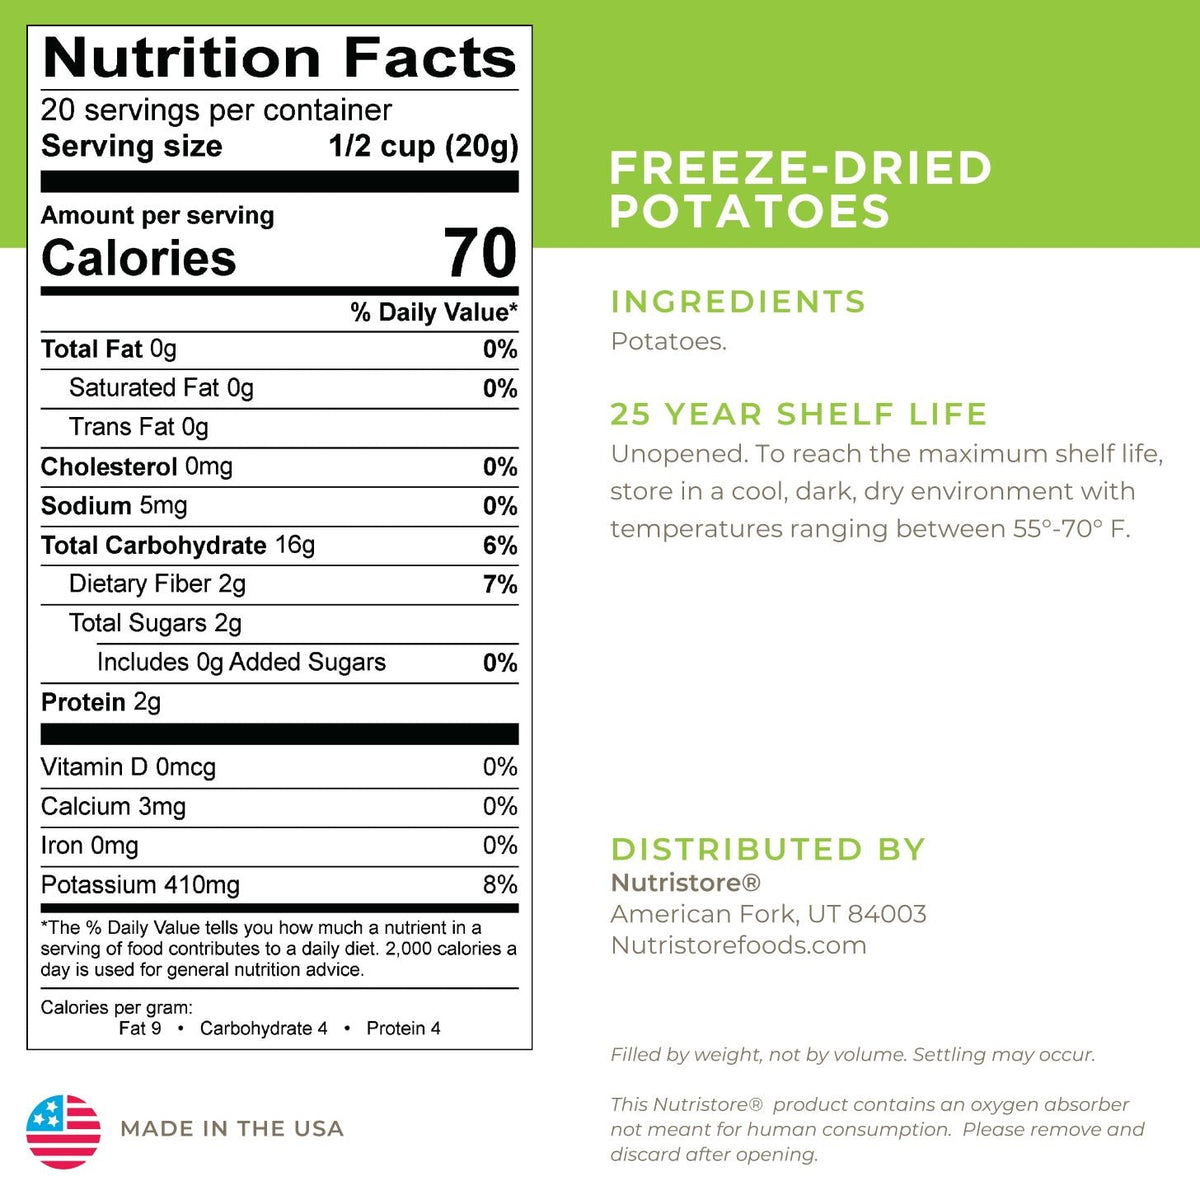 Potatoes Freeze Dried - #10 Can by Nutristore